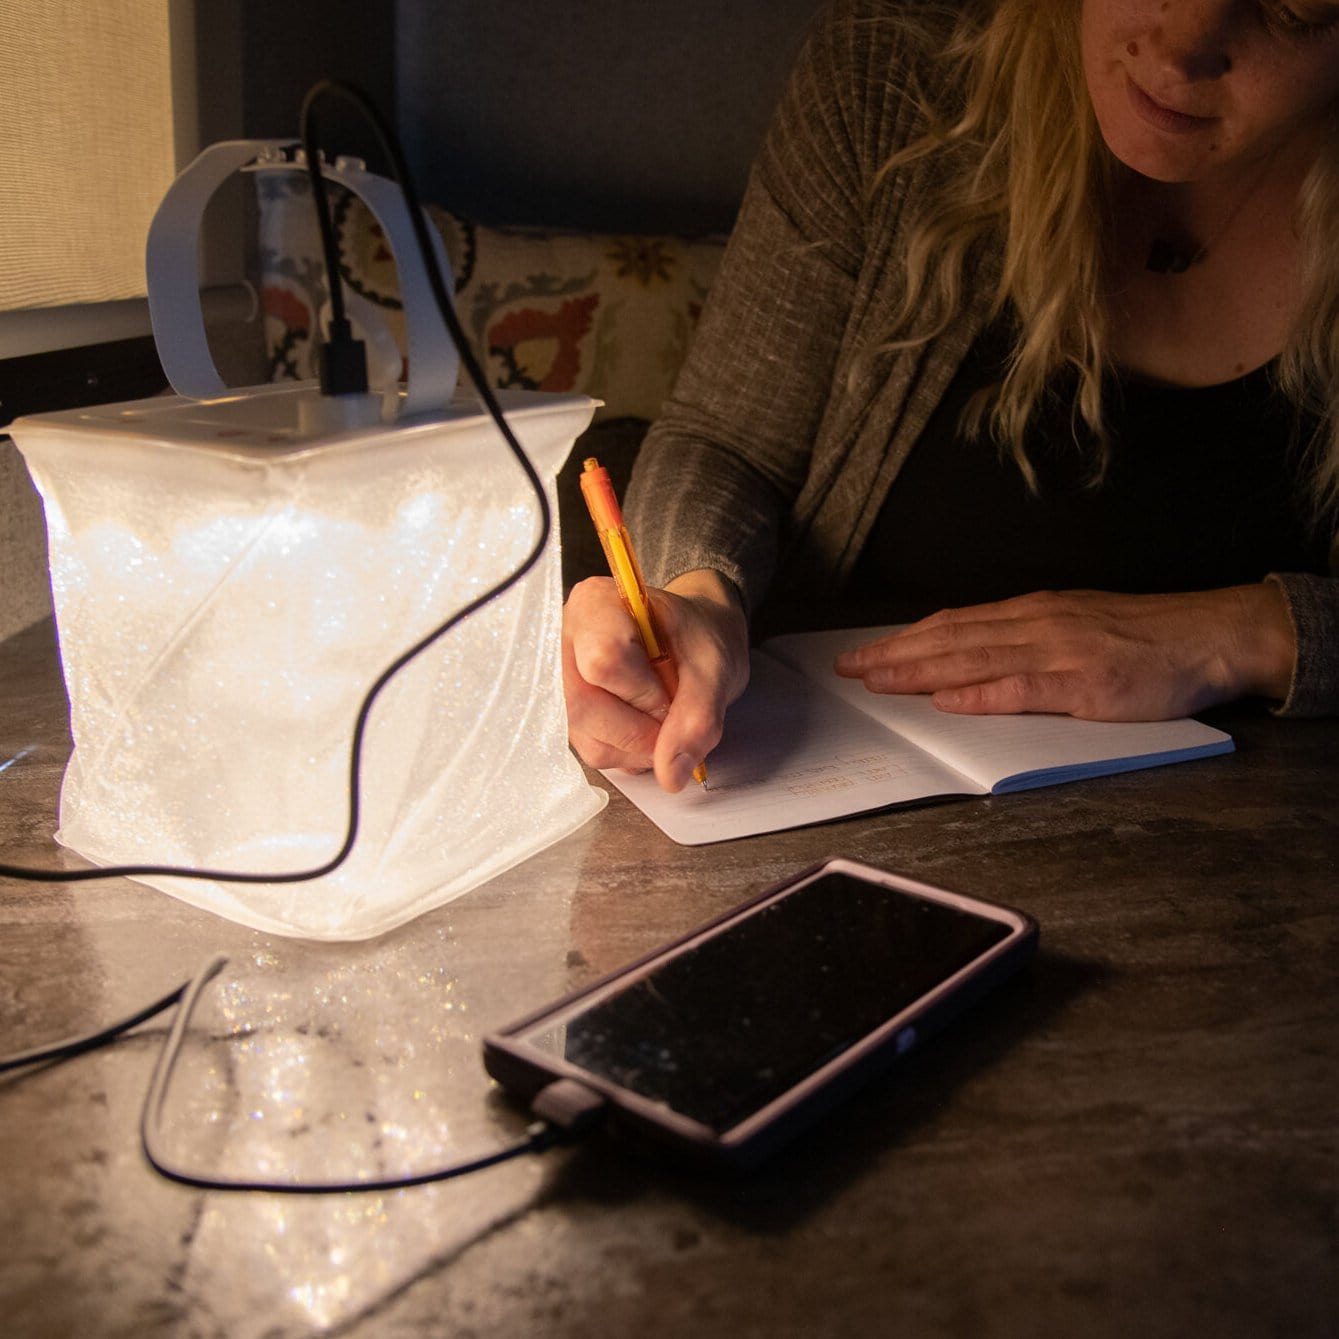 Firefly lantern lights up journal for writing and charges phone at the same time.